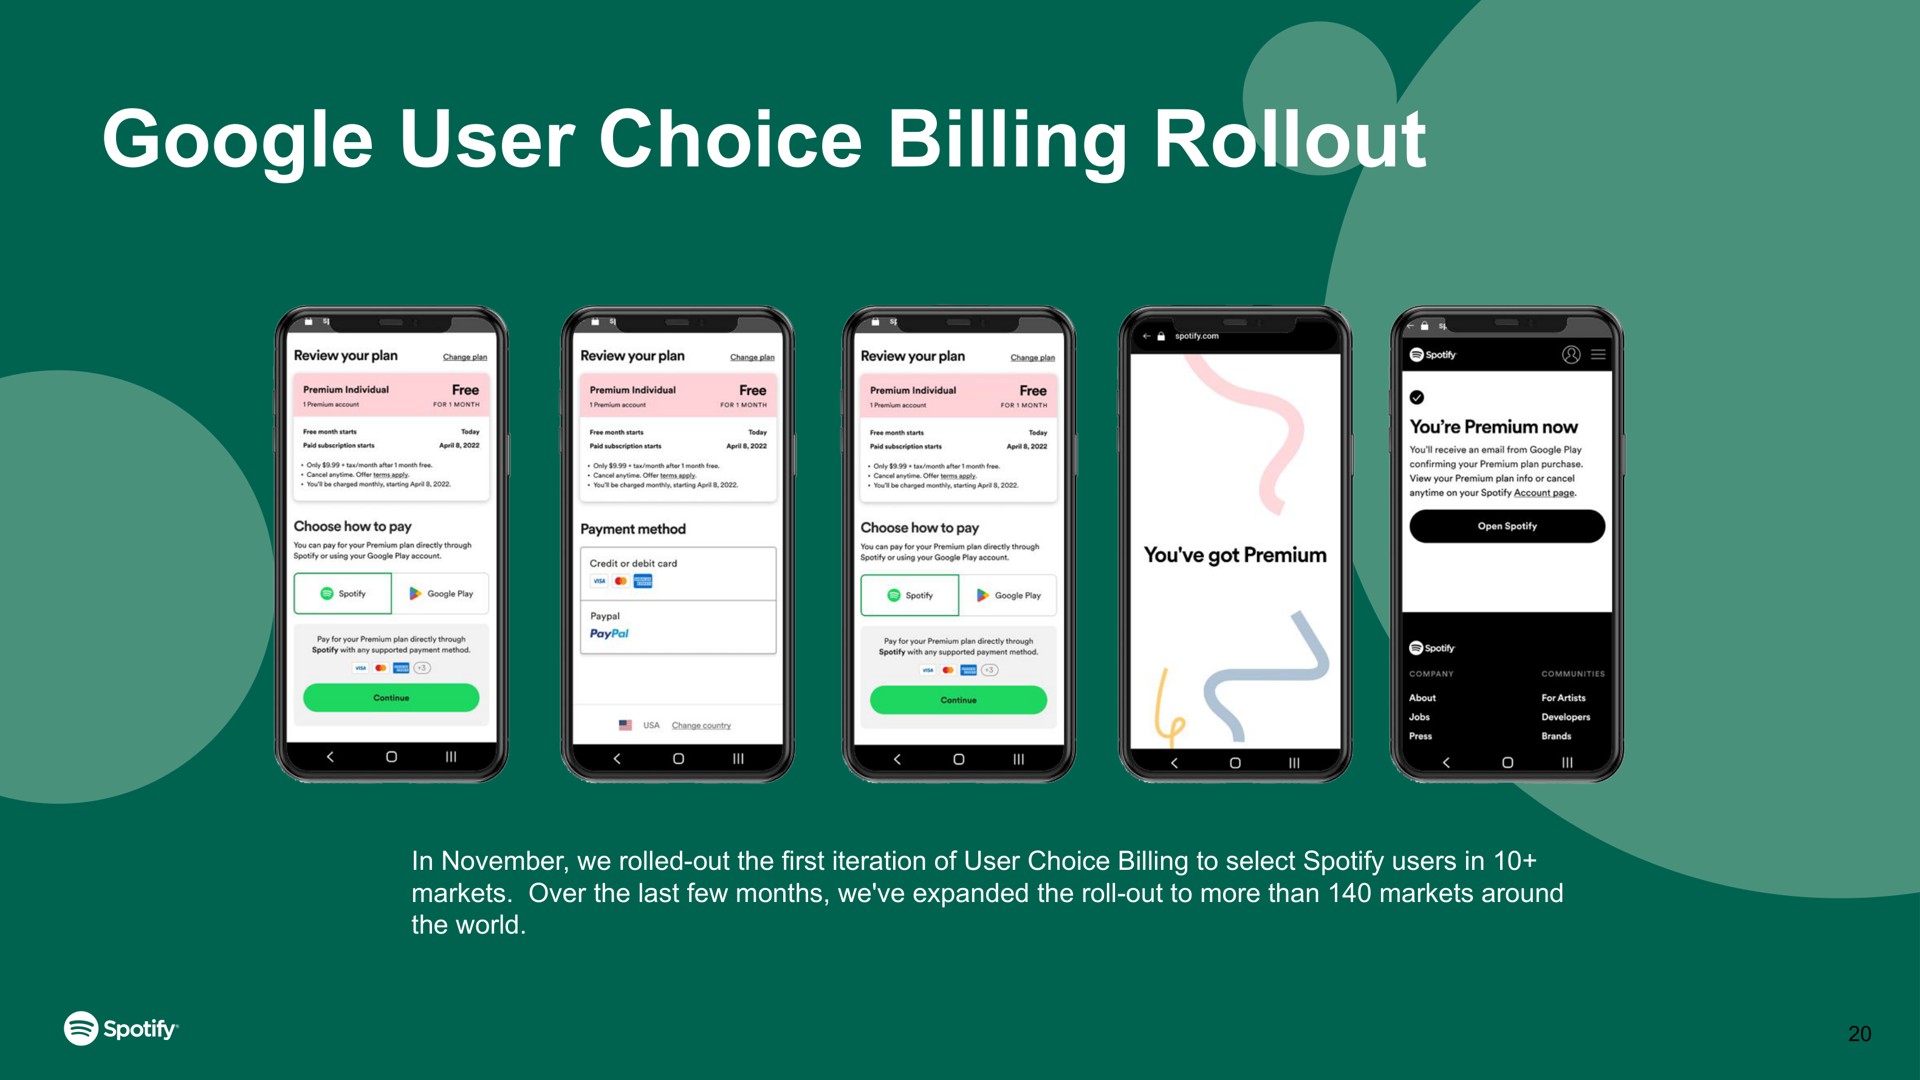 user choice billing in we rolled out the first iteration of to select users in markets over the last few months we expanded the roll out to more than markets around | Spotify